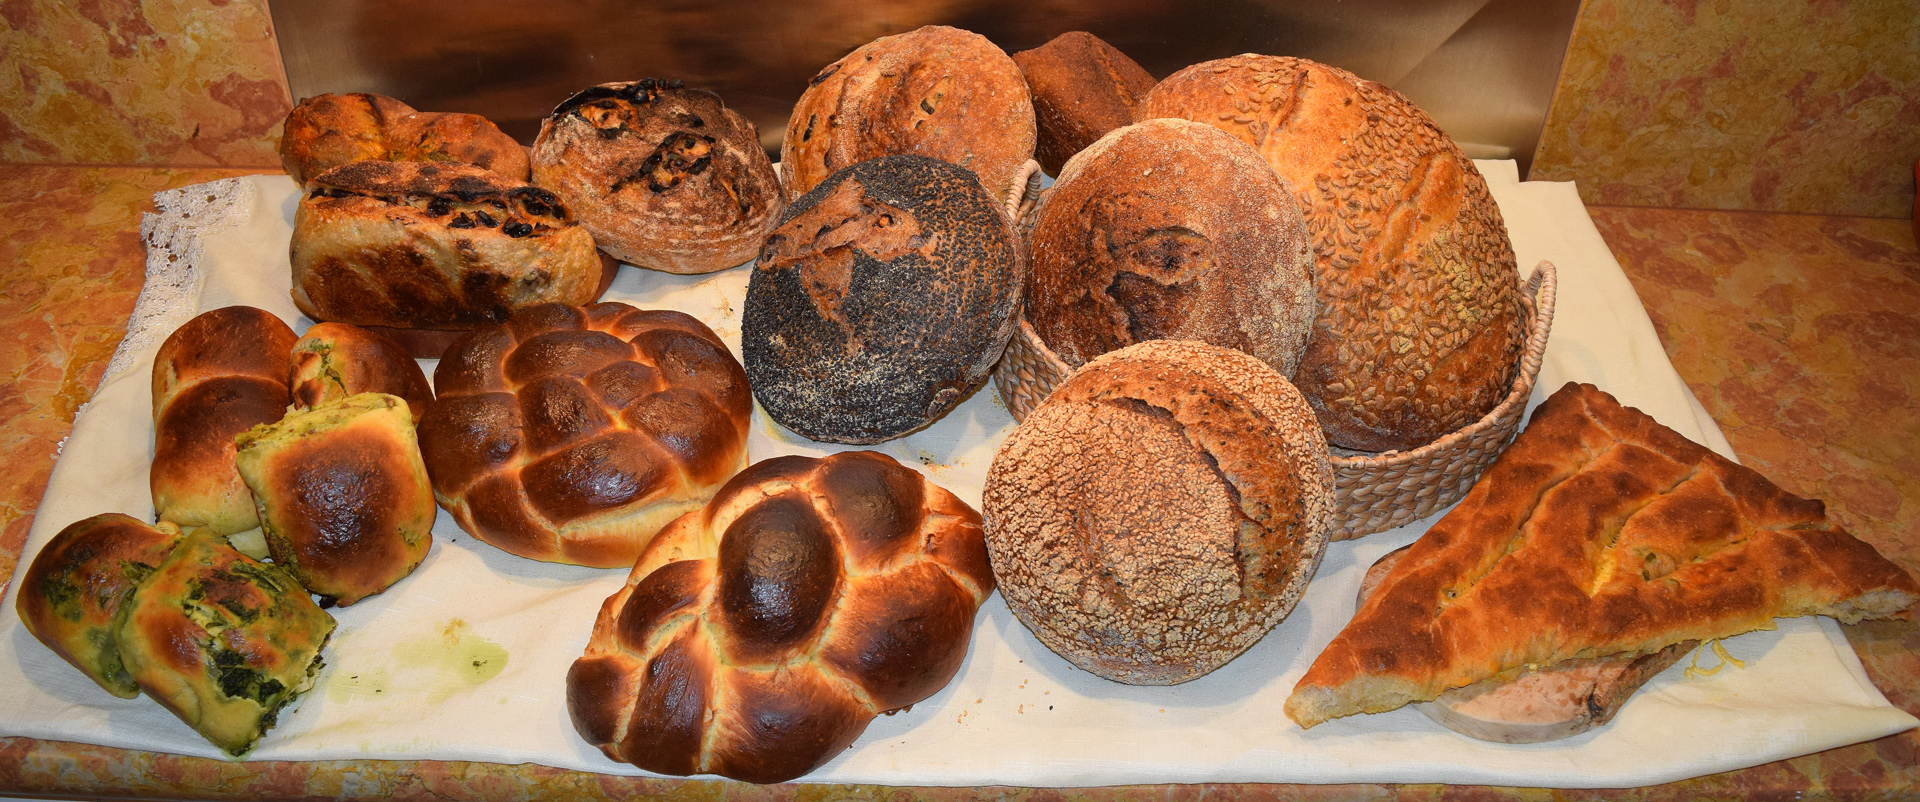 Country breads, challah, filled rolls, fougasse and other kinds of breads are made by hand in Little Sky Bakery's kitchen workshop.